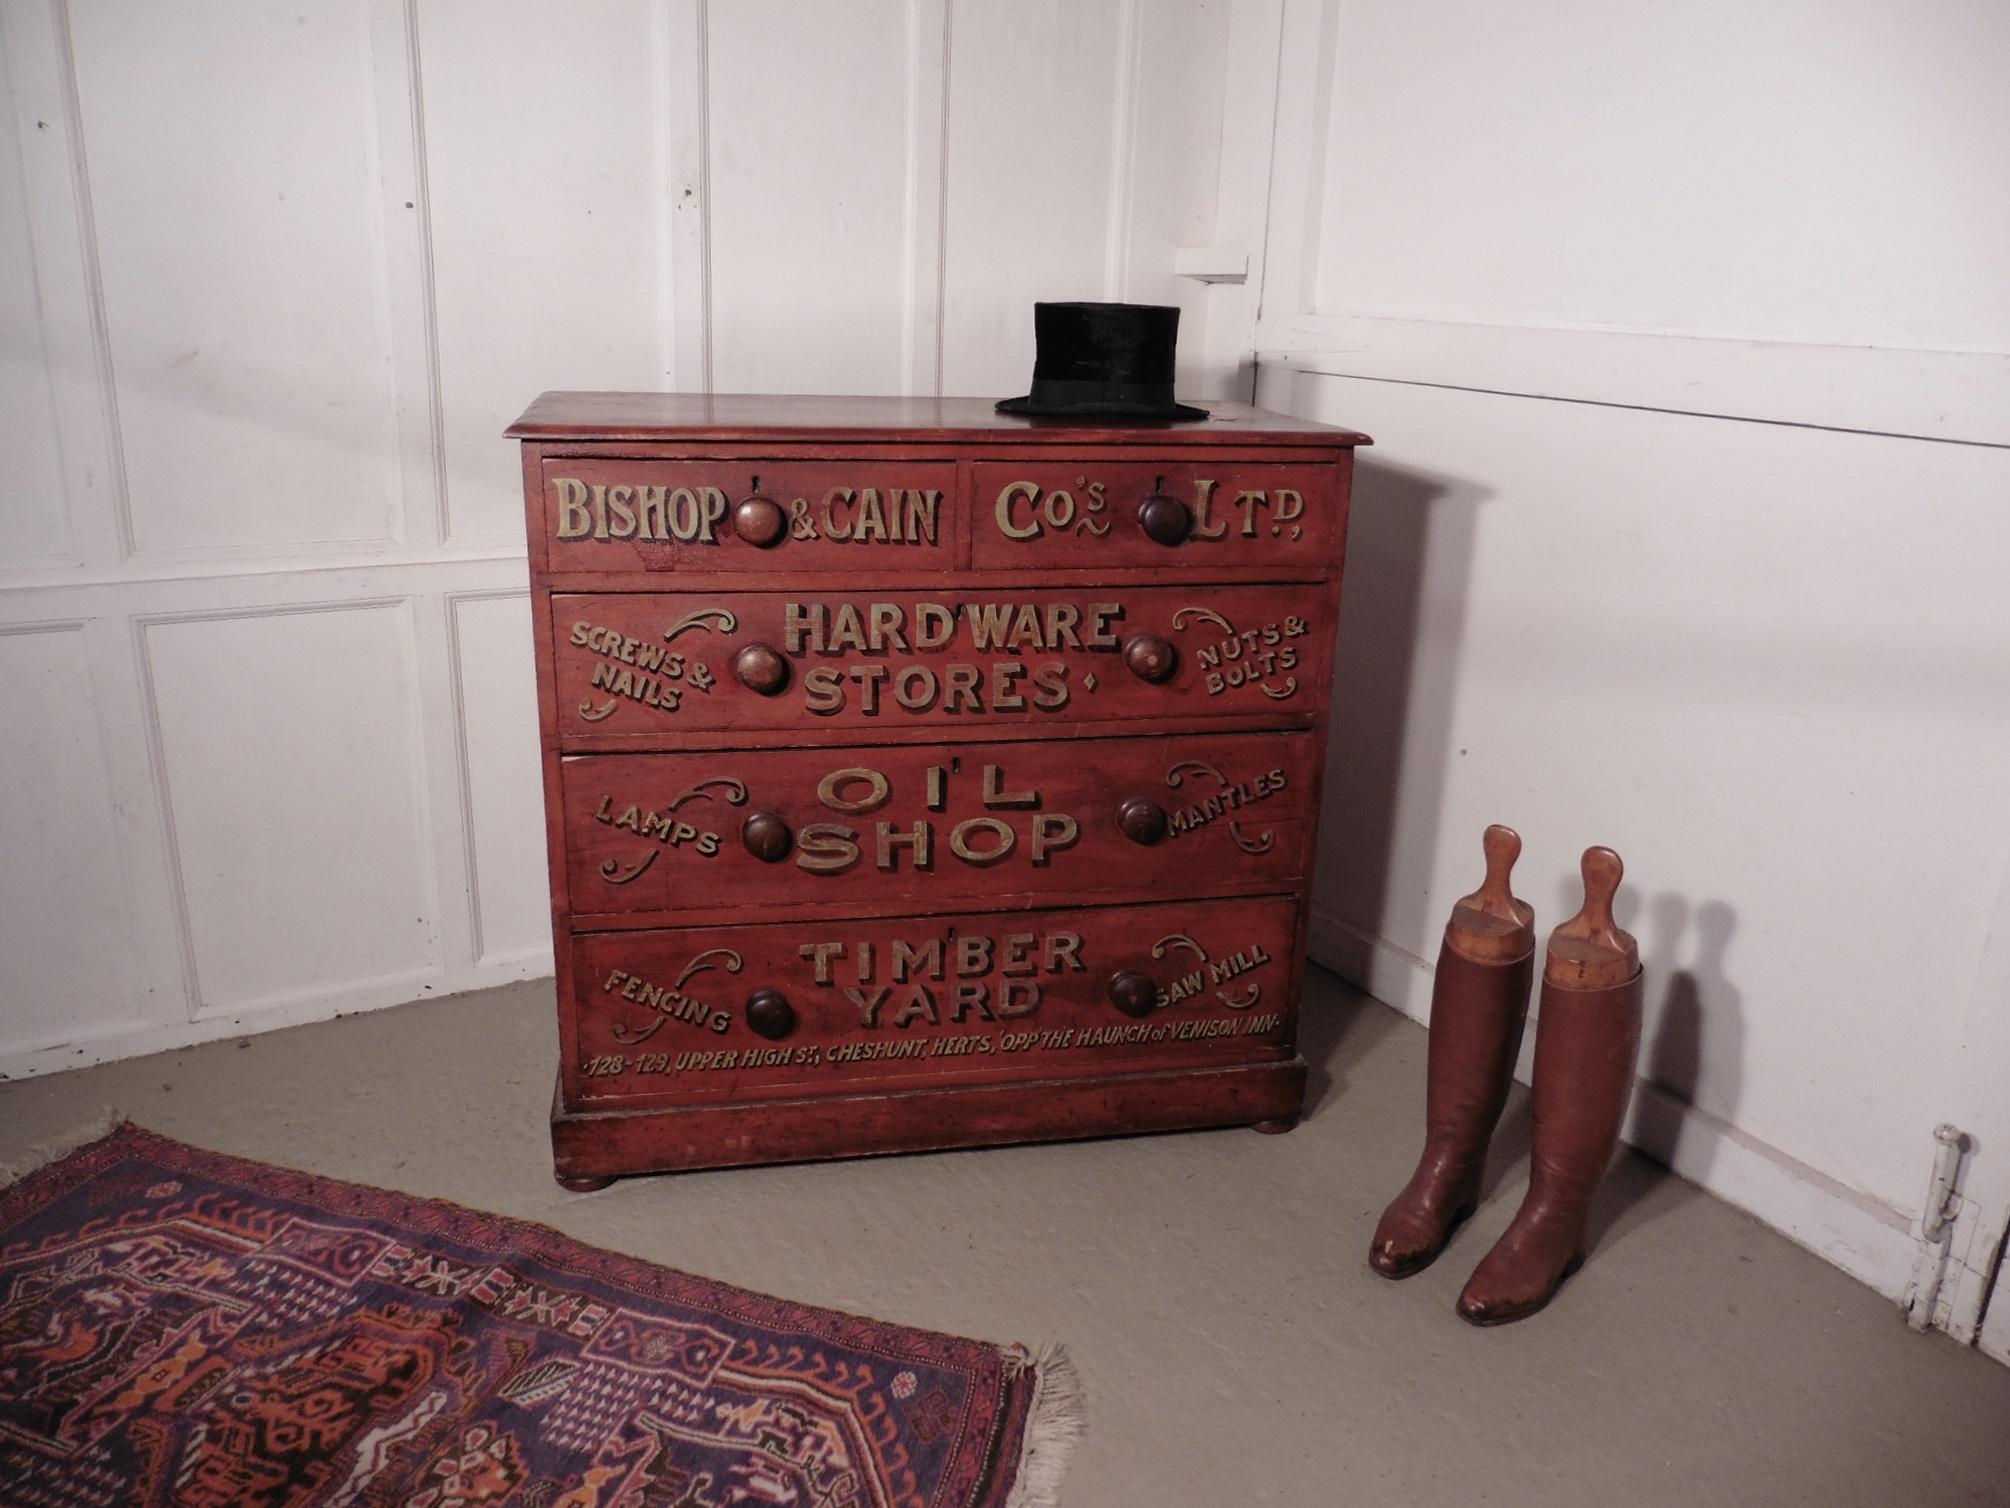 Pine chest of drawers, advertising Bishop and Cain Ironmongers

This is a 5-drawer pine chest of drawers, the chest of drawers is decorated on the front advertising Bishop and Cain Ironmongers who sell everything from candles to Sawn Timber